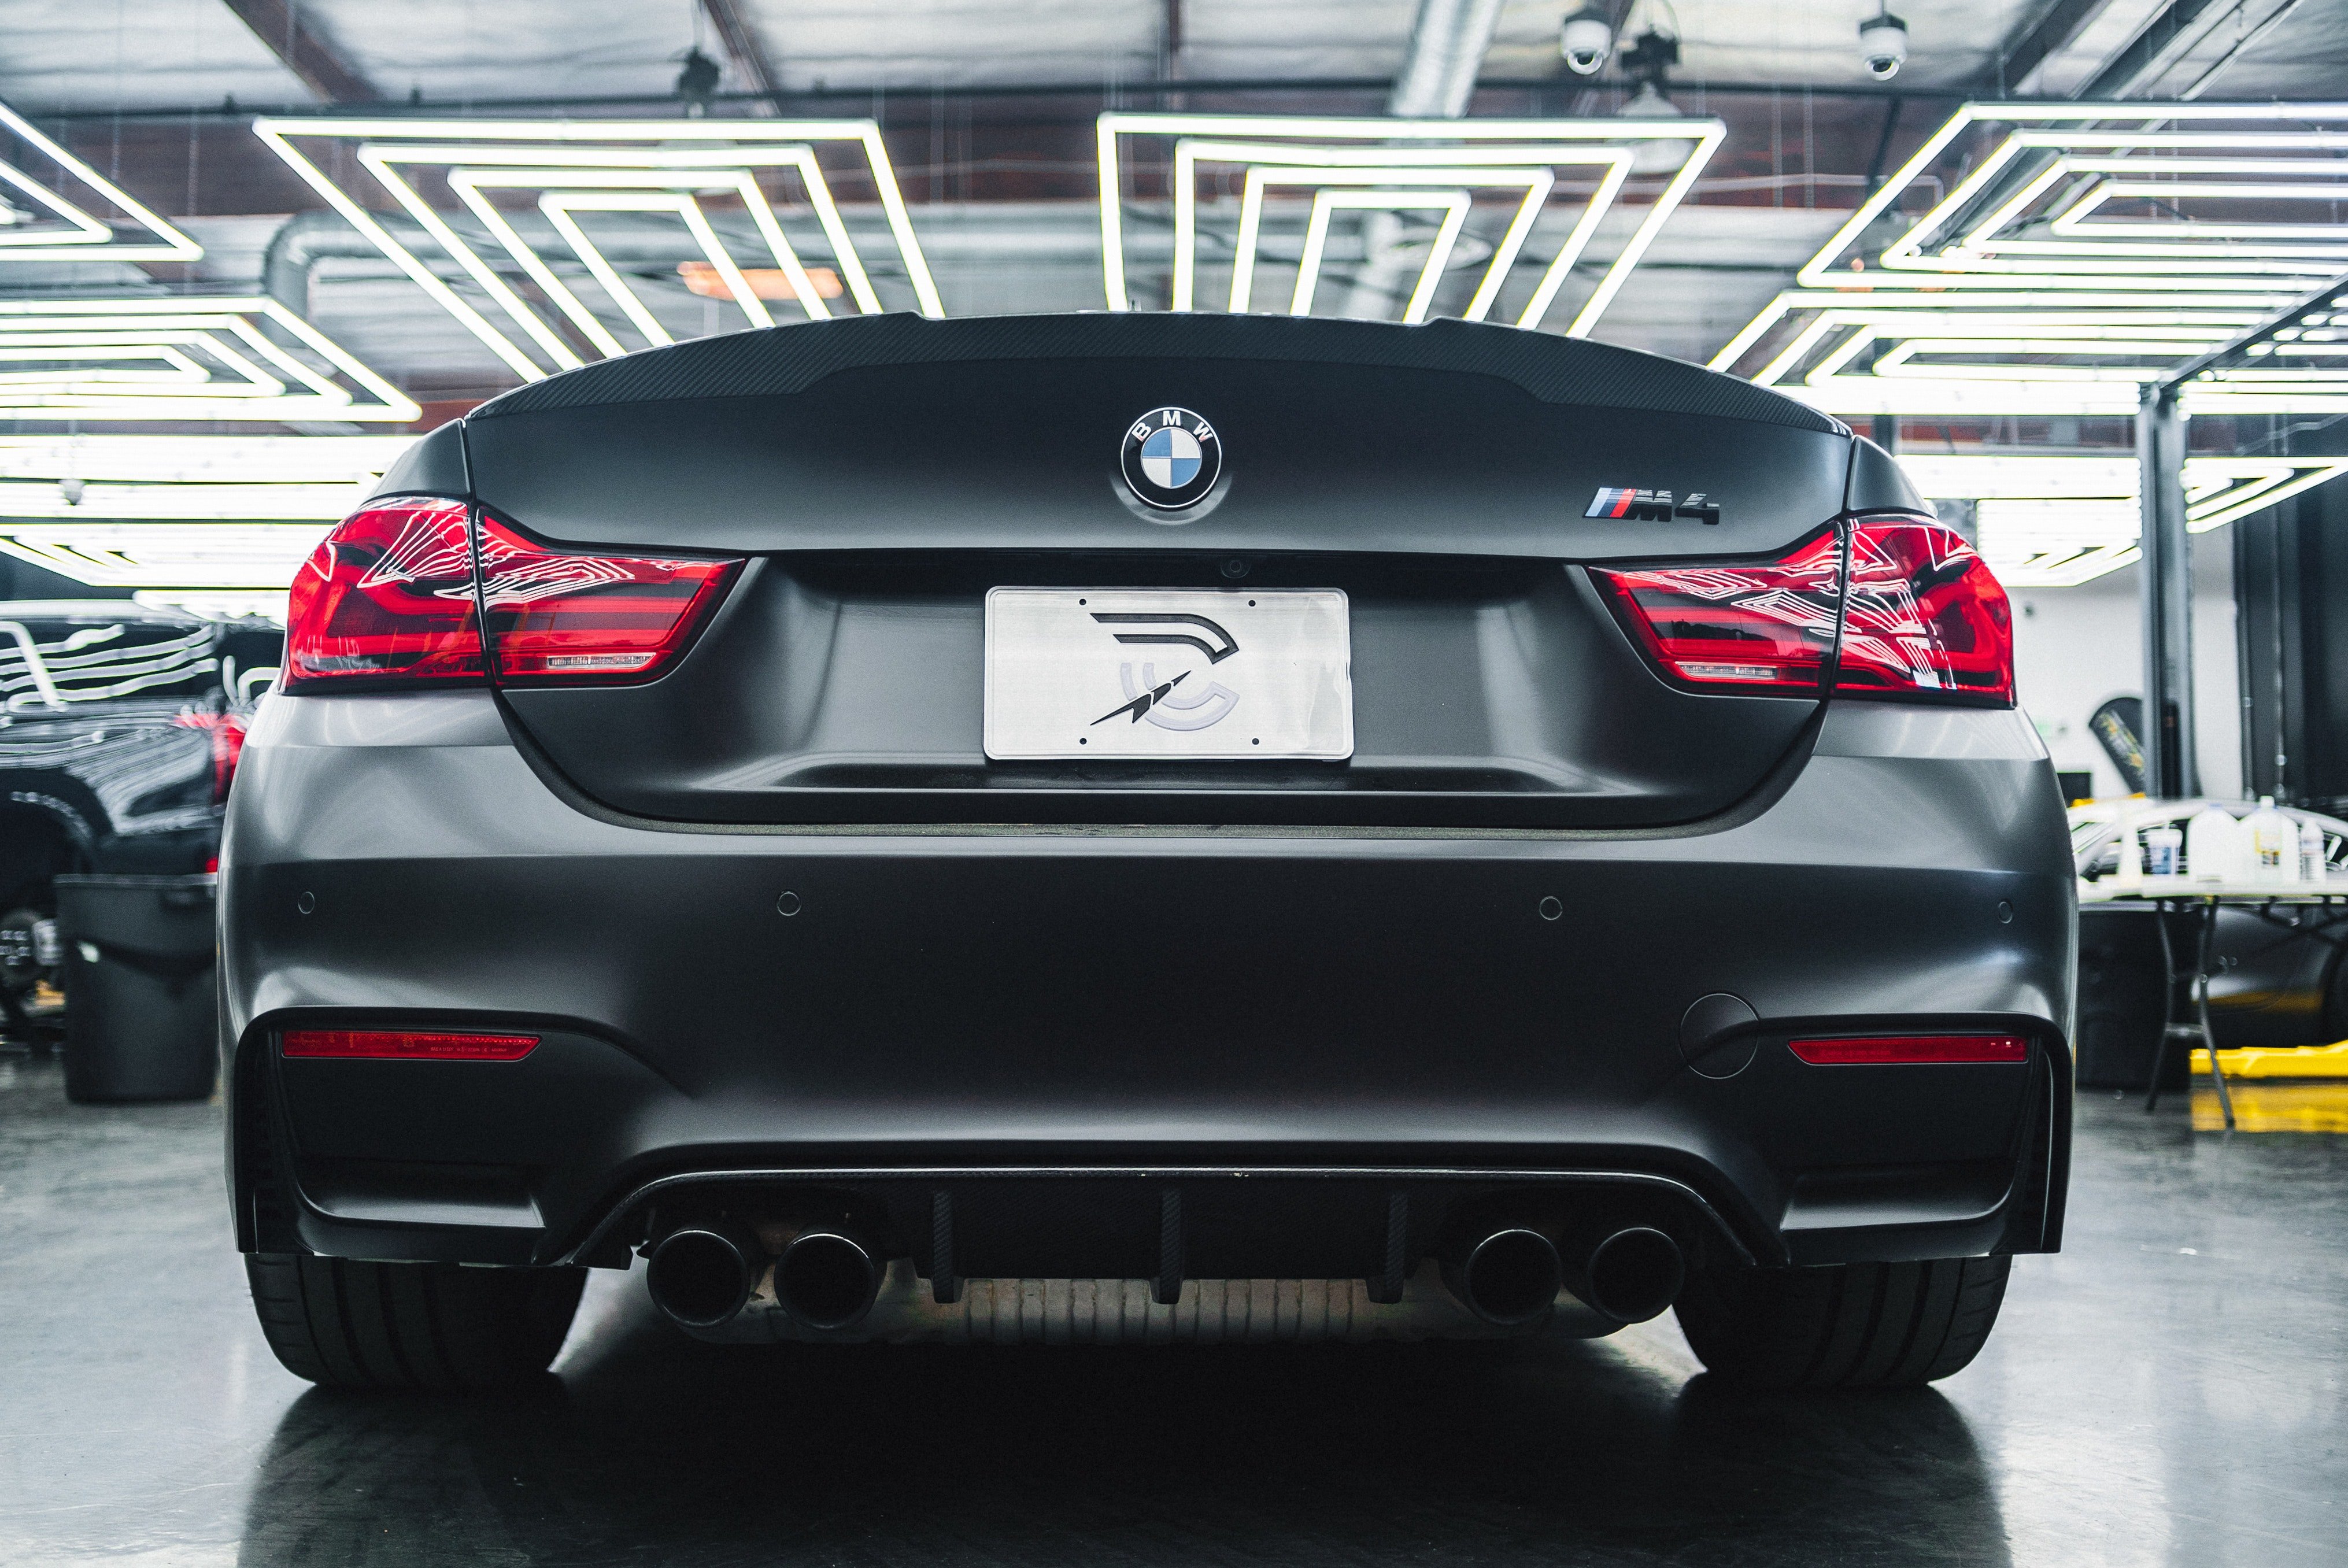 Pictured - A black BMW M4 coupe | Source: Pexels 